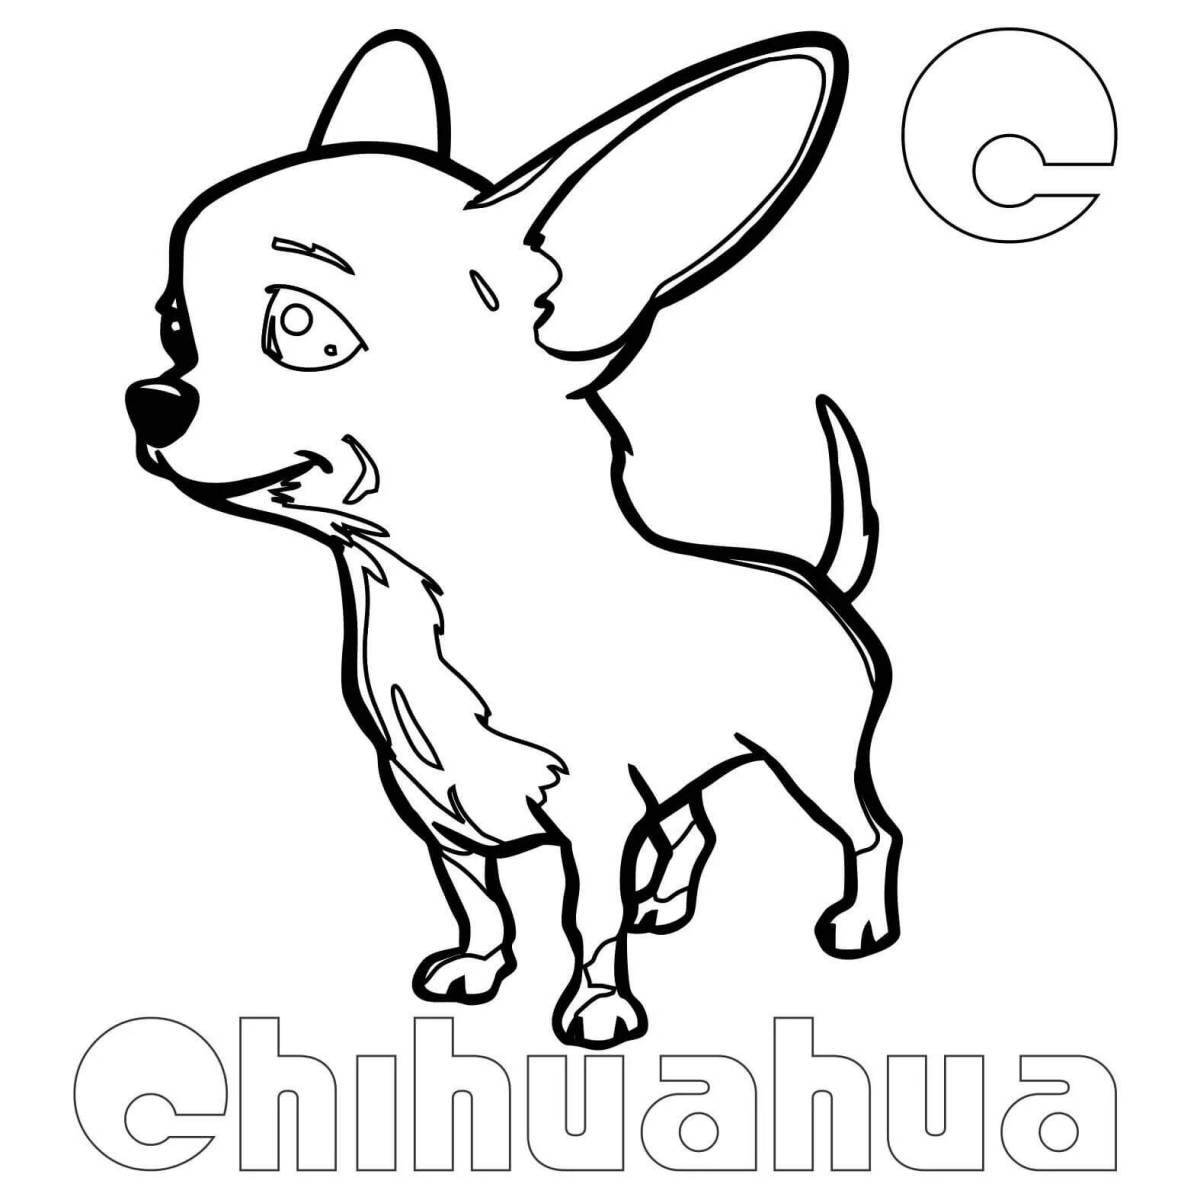 Amazing chihuahua coloring page for kids